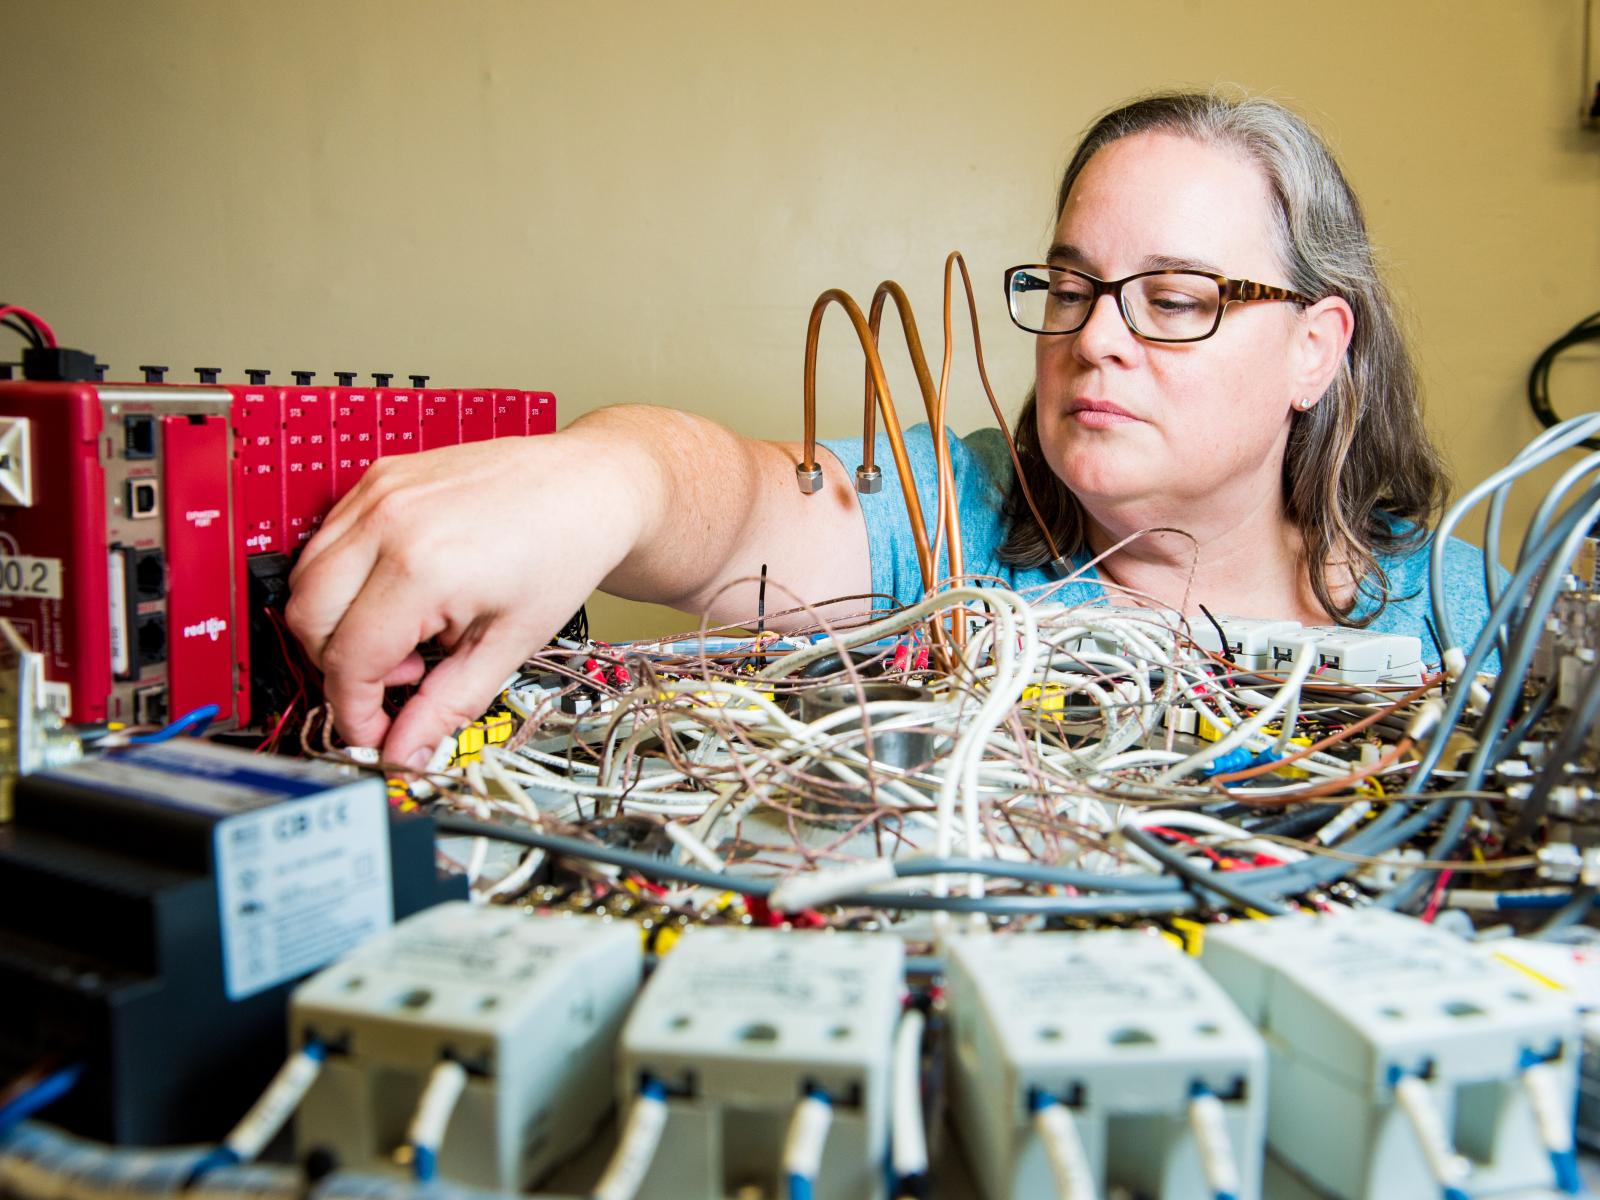 Researcher Heather Colburn reaches across a neck-high platform to connect wires on scientific equipment.